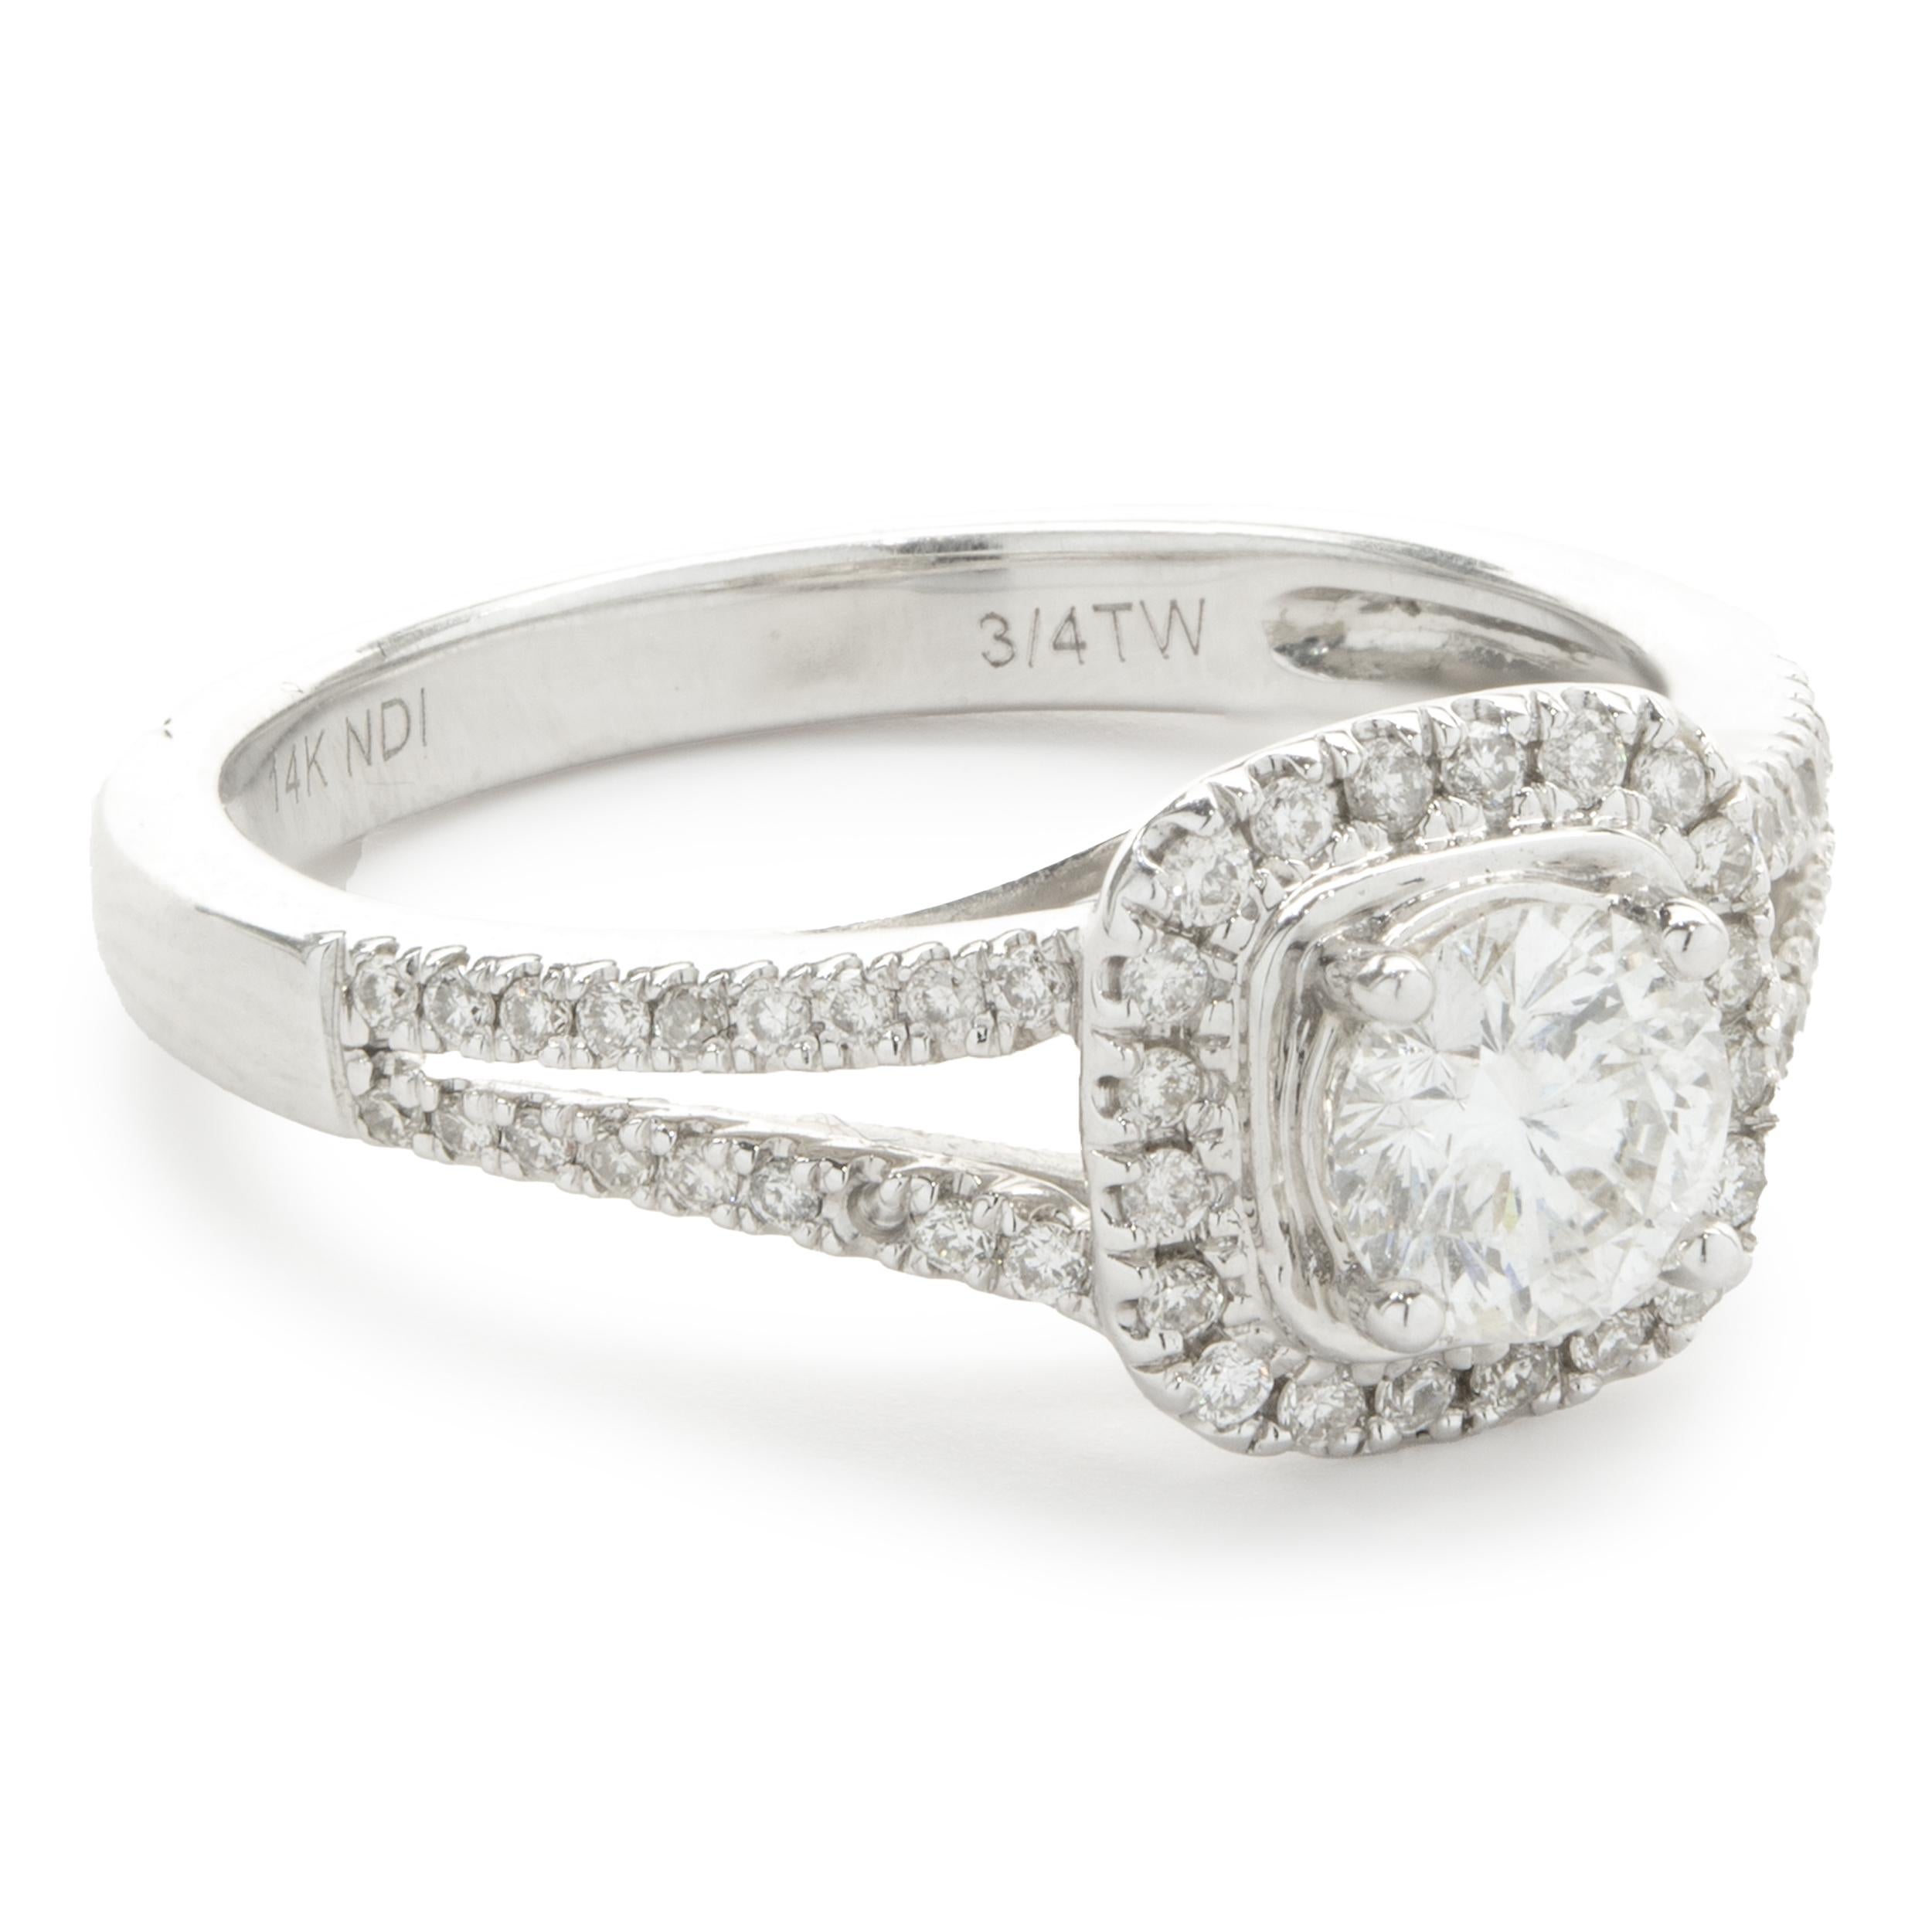 Designer: custom
Material: 14K white gold
Center Diamond: 1 round brilliant cut = 0.50ct
Color: H
Clarity: I1
Diamond: 56 round brilliant cut = 0.25cttw
Color: G
Clarity: SI1
Ring Size: 7 (please allow two additional shipping days for sizing